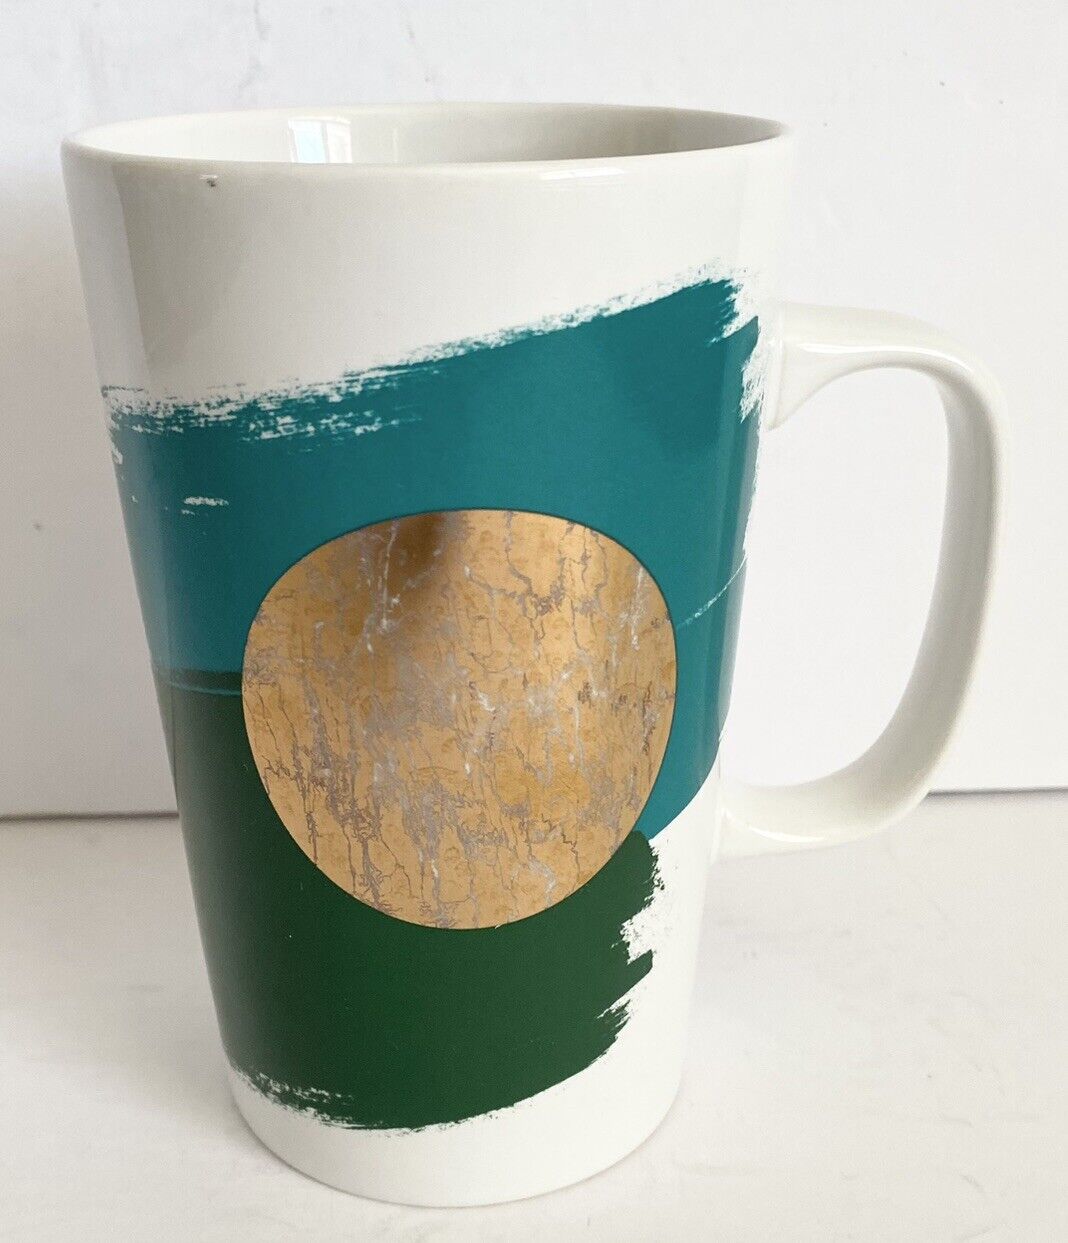 Starbucks ceramic Tall  mug 16 oz Dot Collection 2014 Turquoise Forest Green Cup